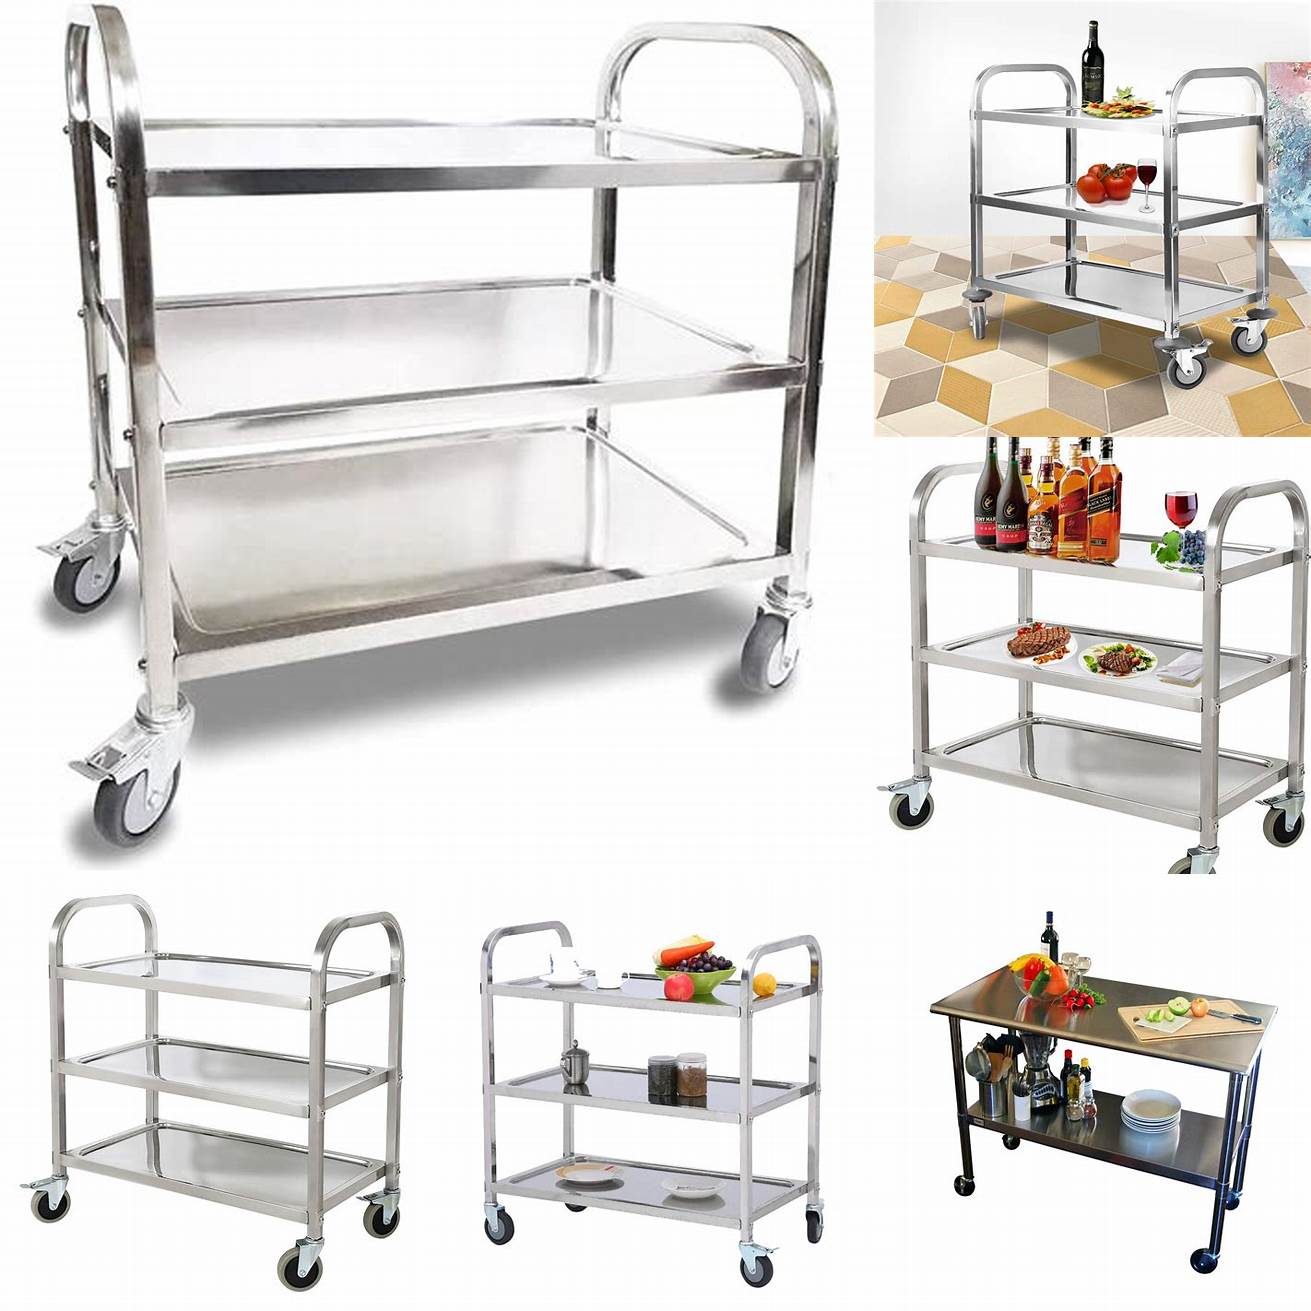 A stainless steel kitchen cart with locking wheels